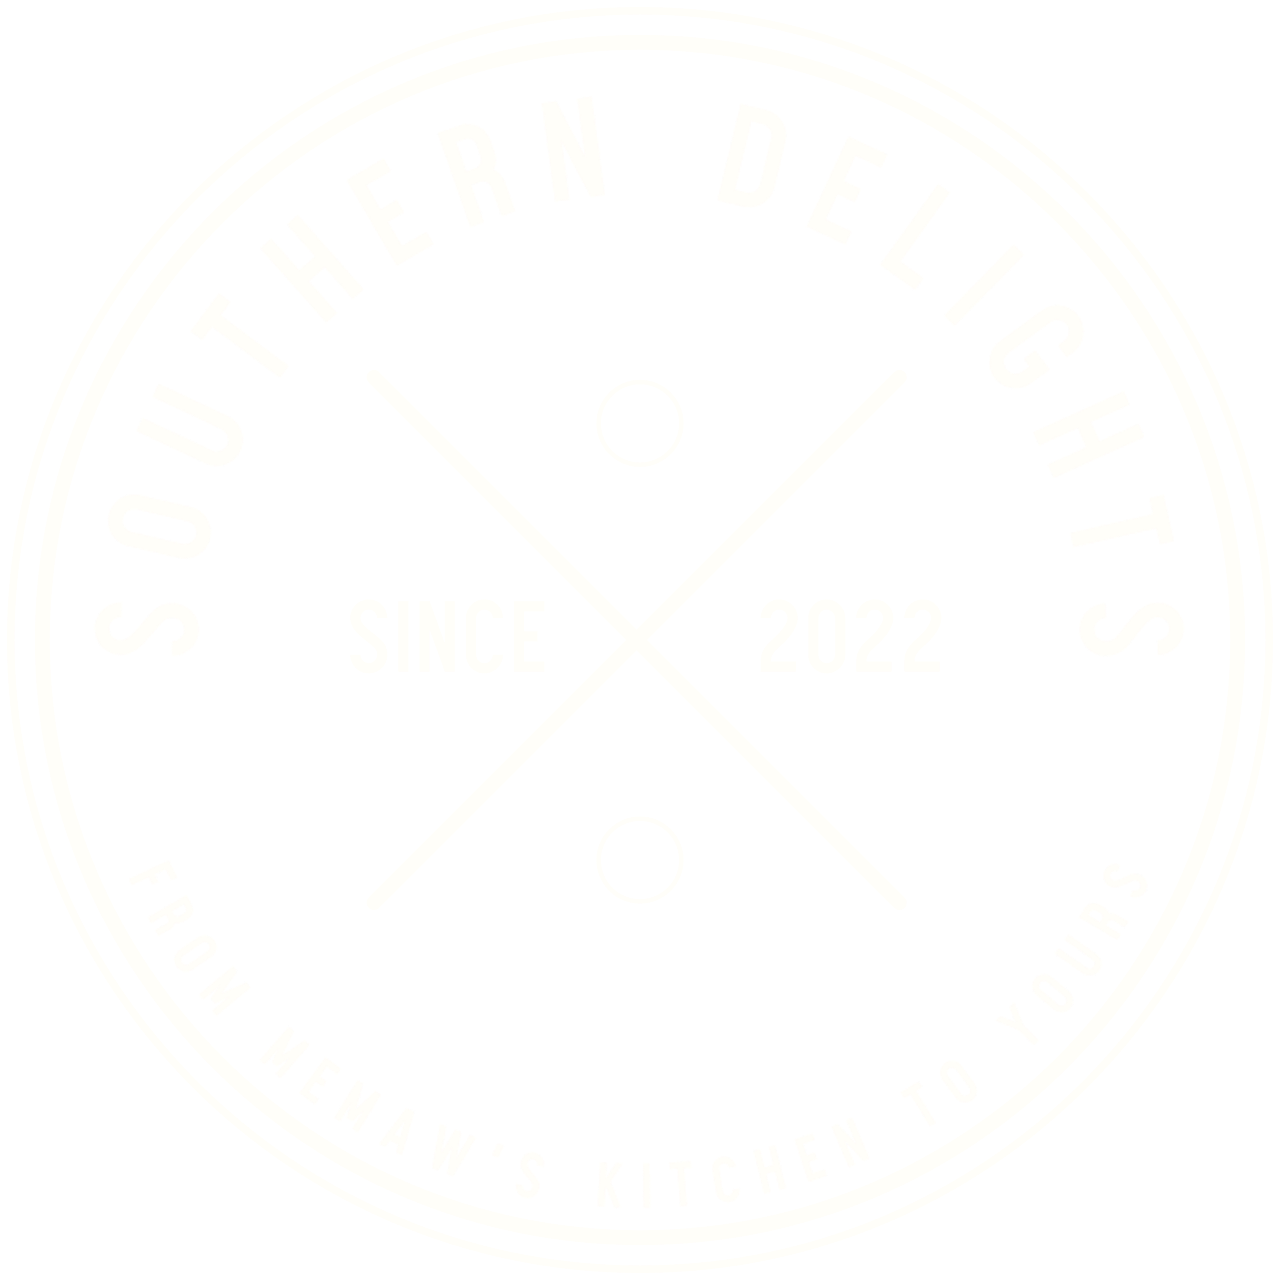 Southern Delights's logo